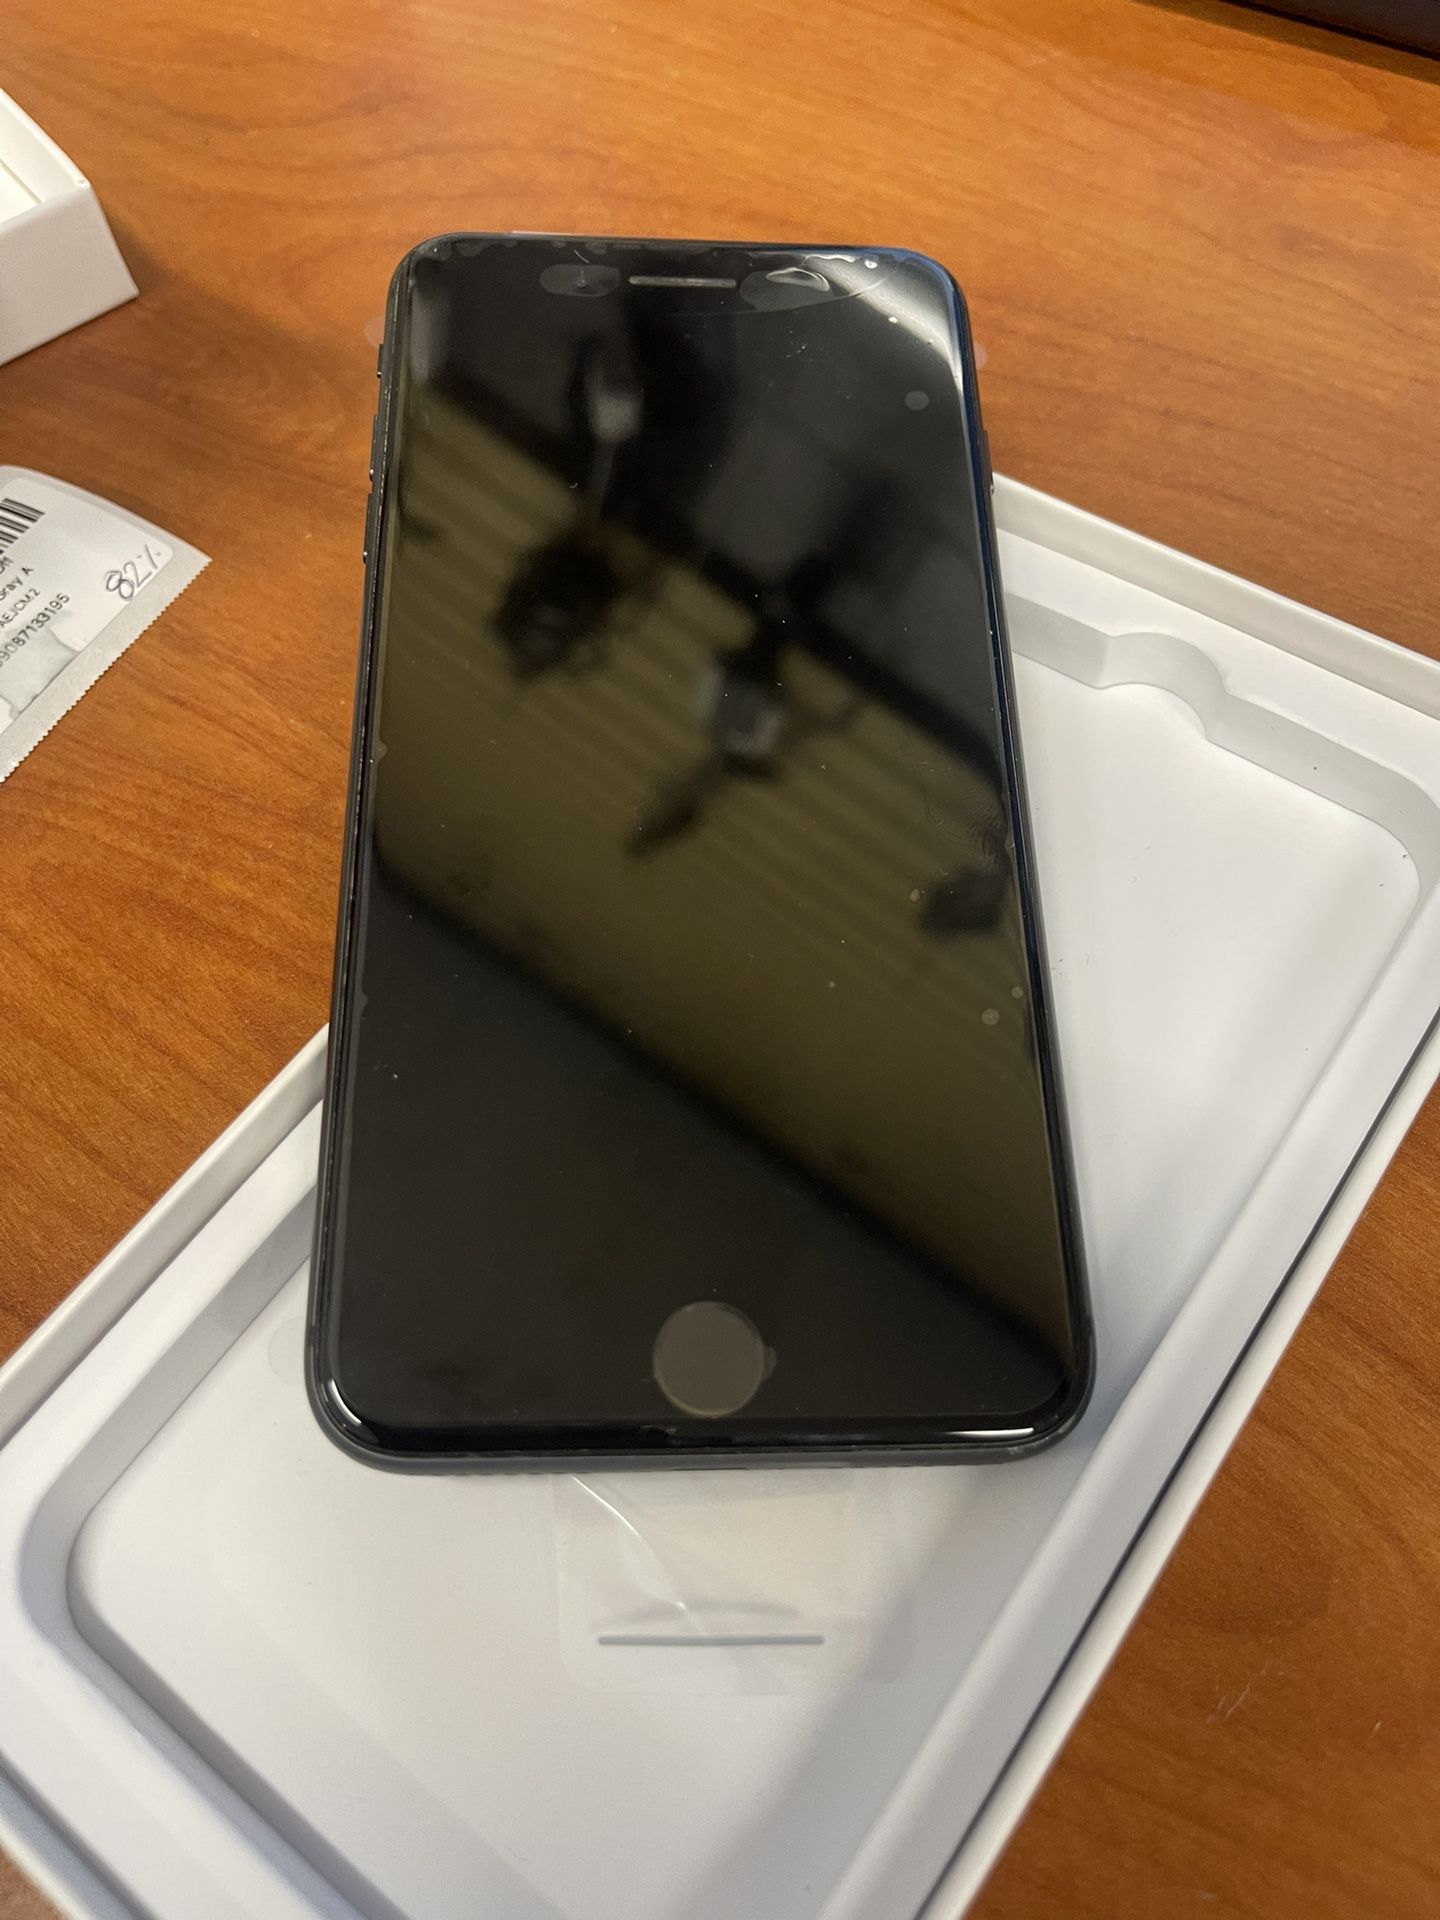 iPhone 8 Plus 64gb Unlocked with charger for $195